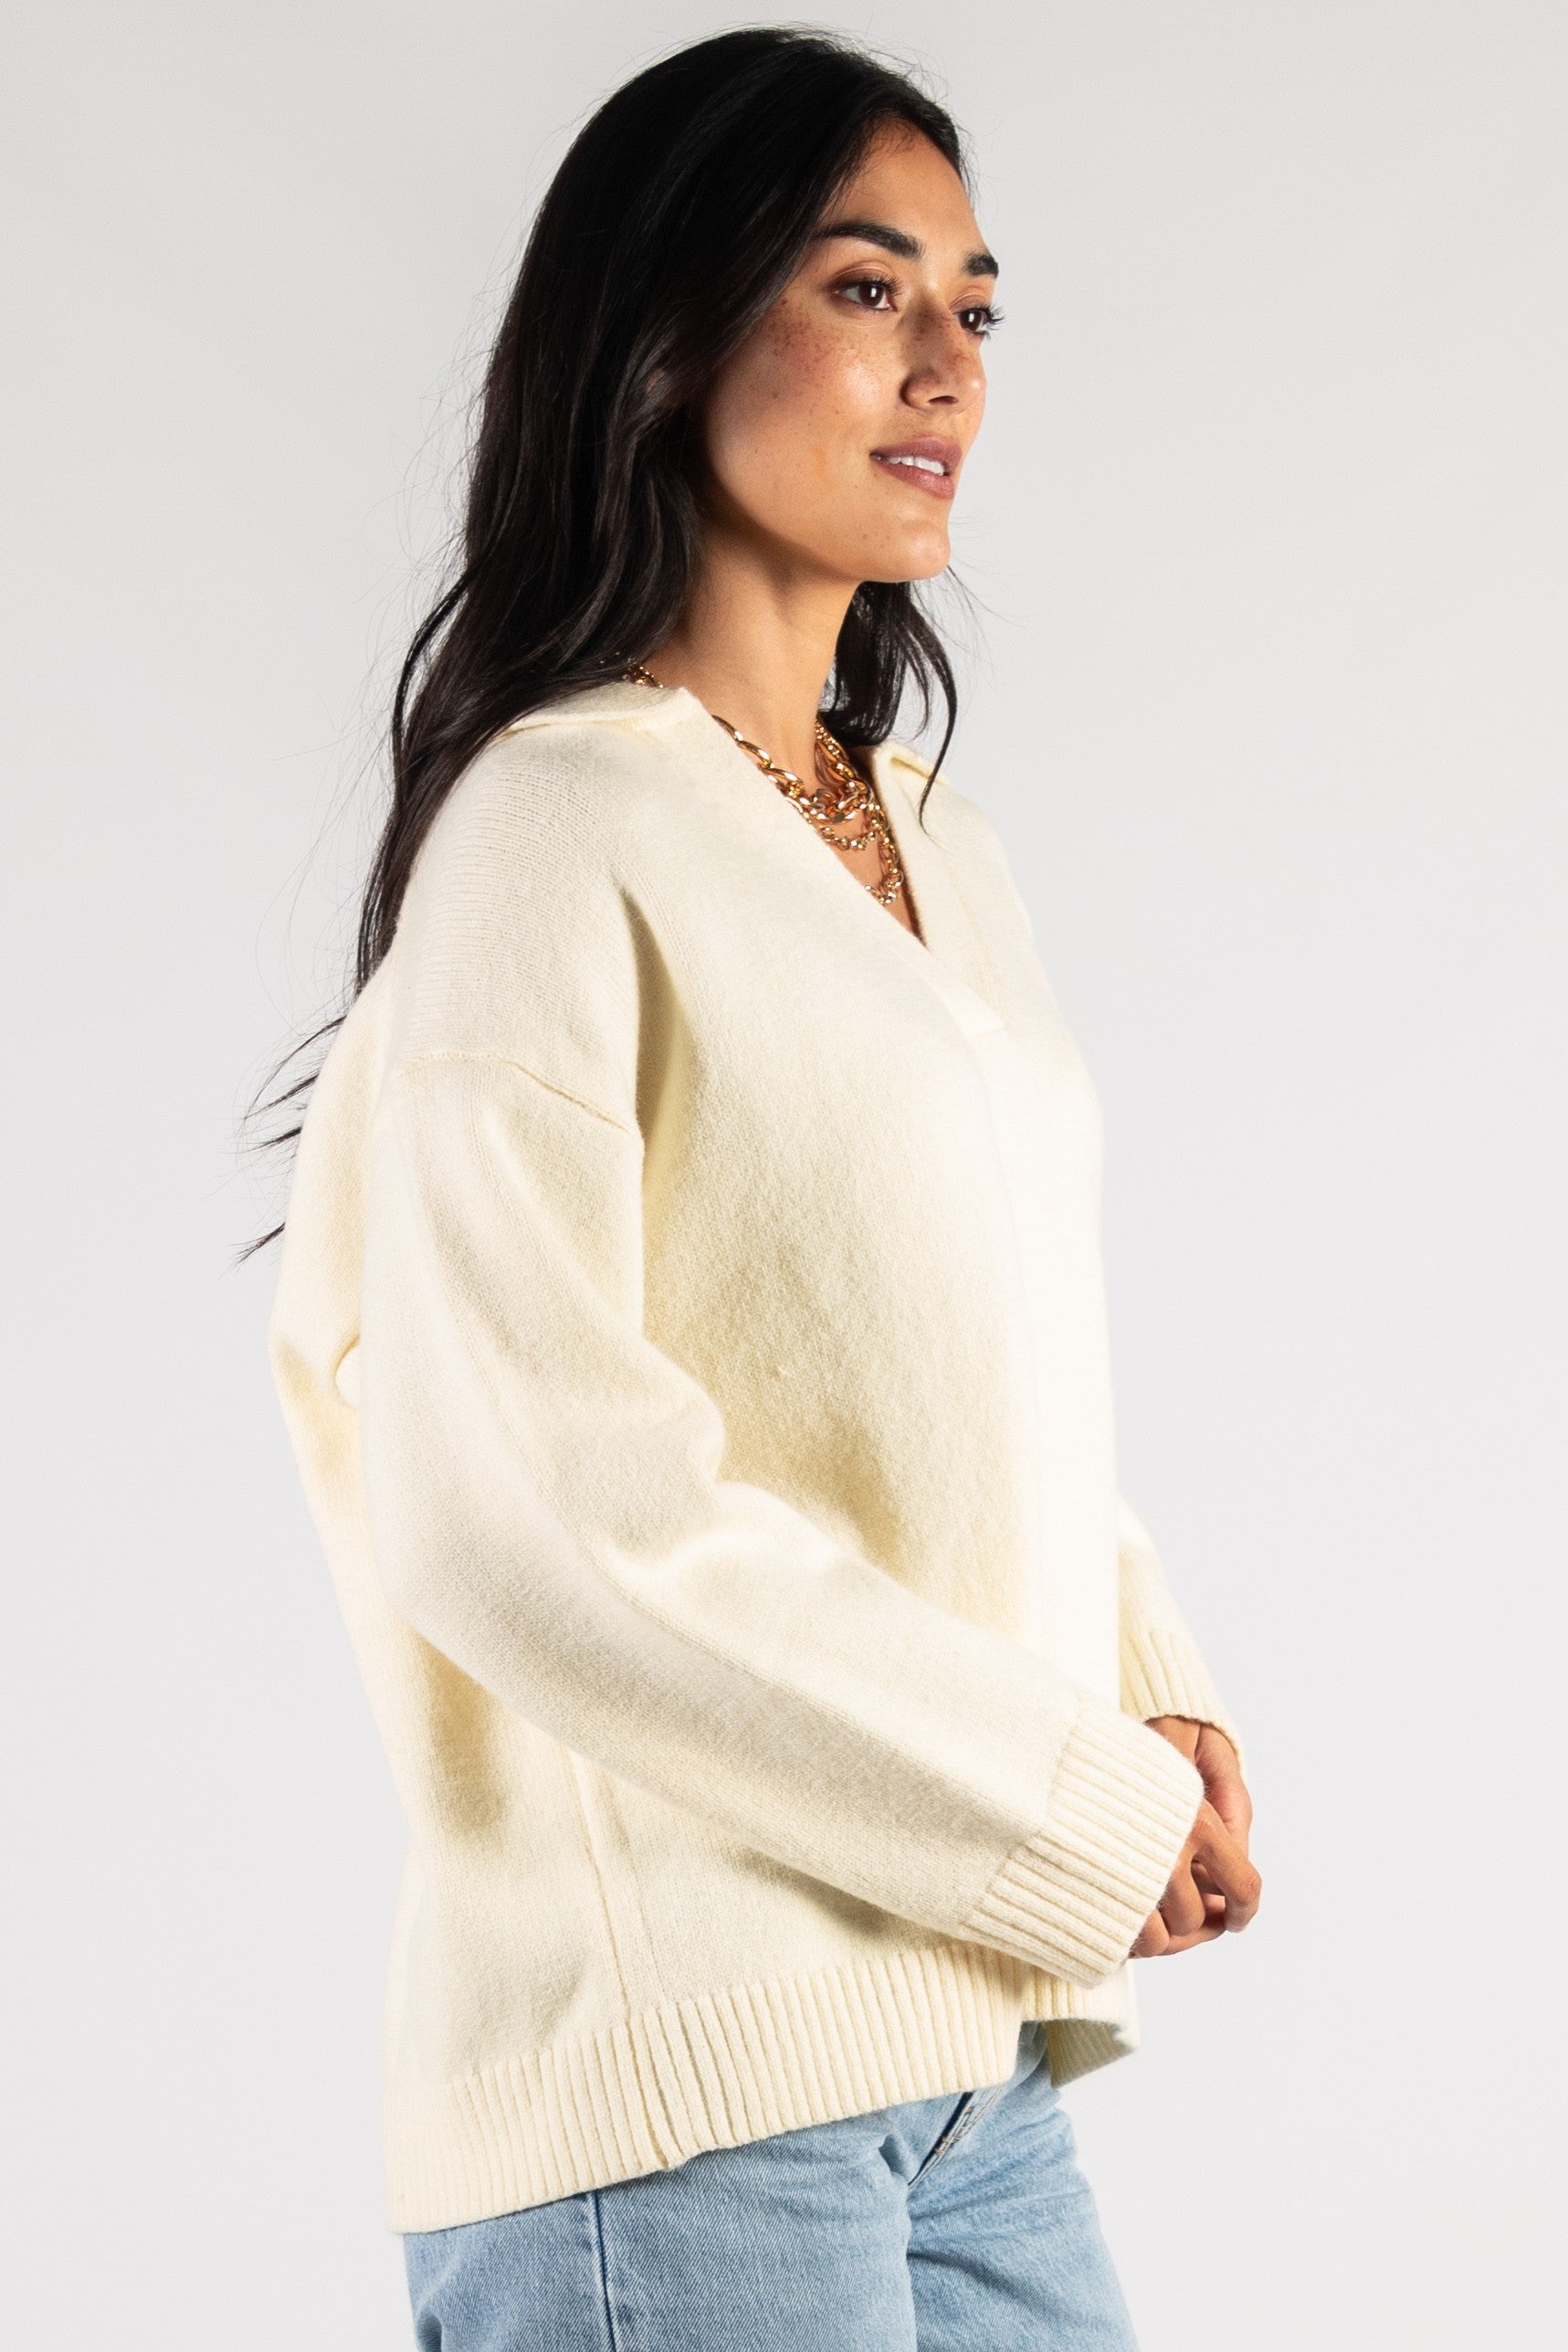 Cozy Up Sweater -Cream - Southern Grace Creations